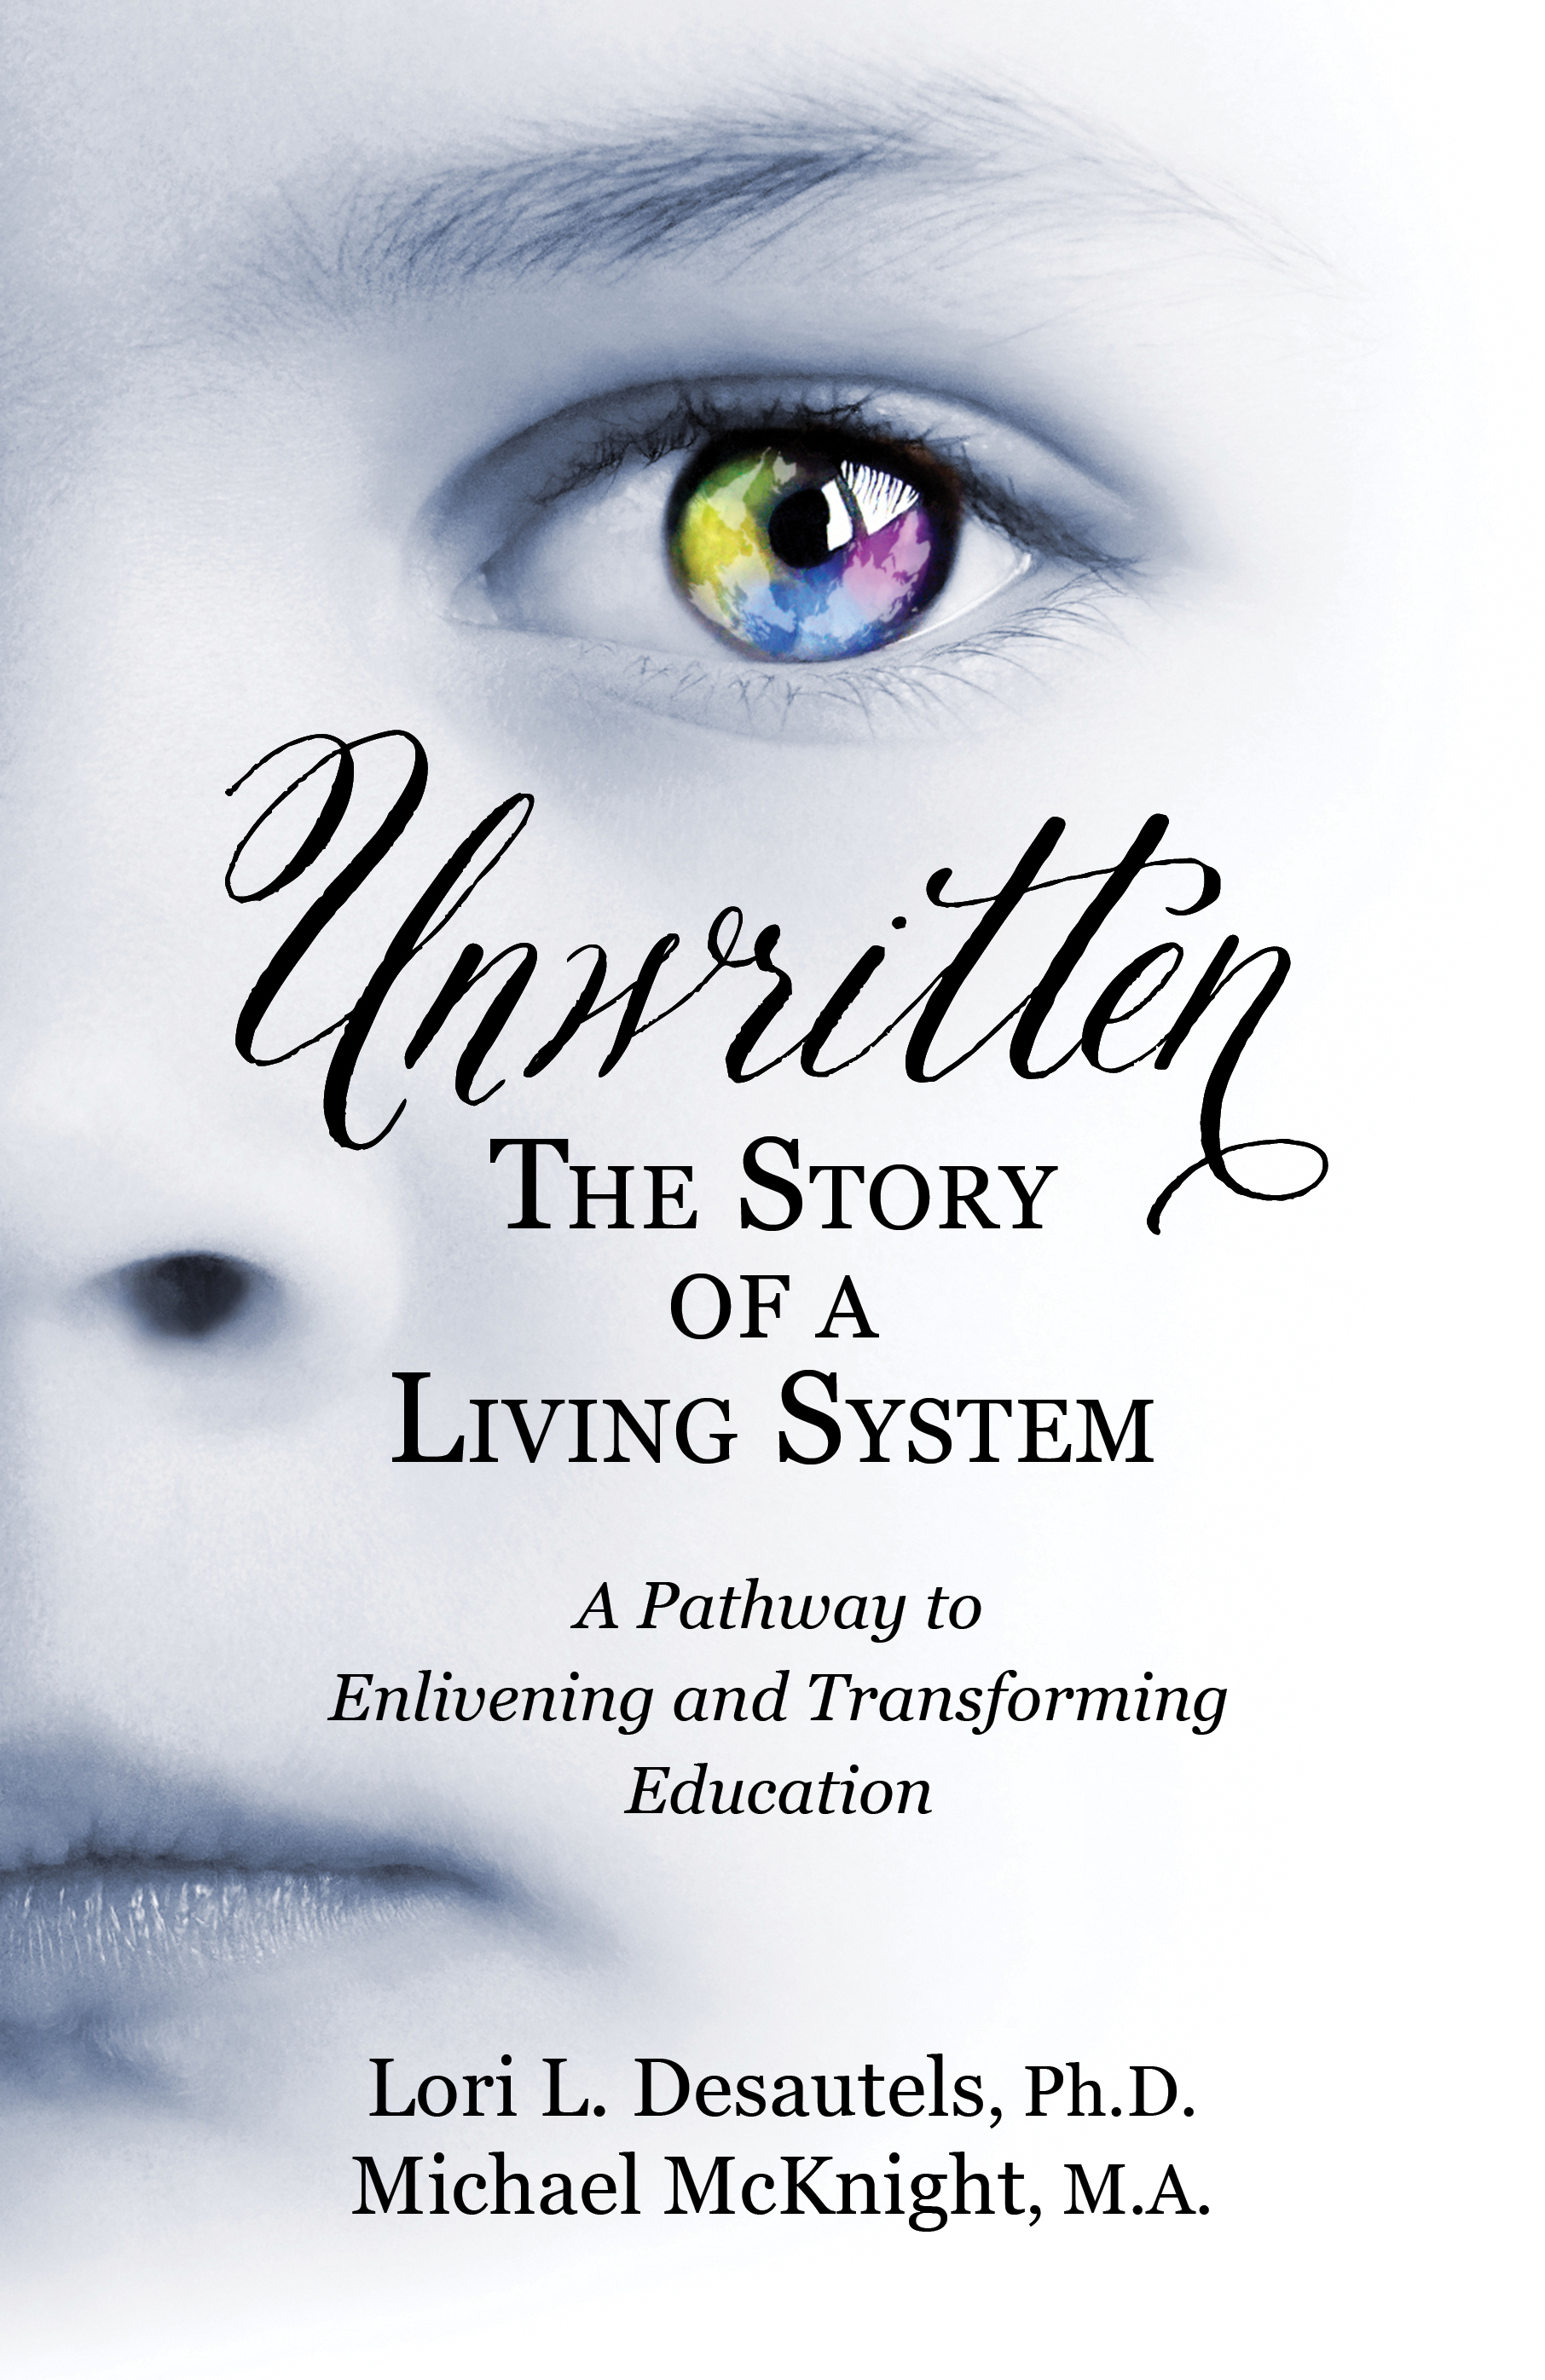 Unwritten, The Story of a Living System: A Pathway to Enlivening and Transforming Education by Lori Desautels, Ph.D. and Michael McKnight, M.A.